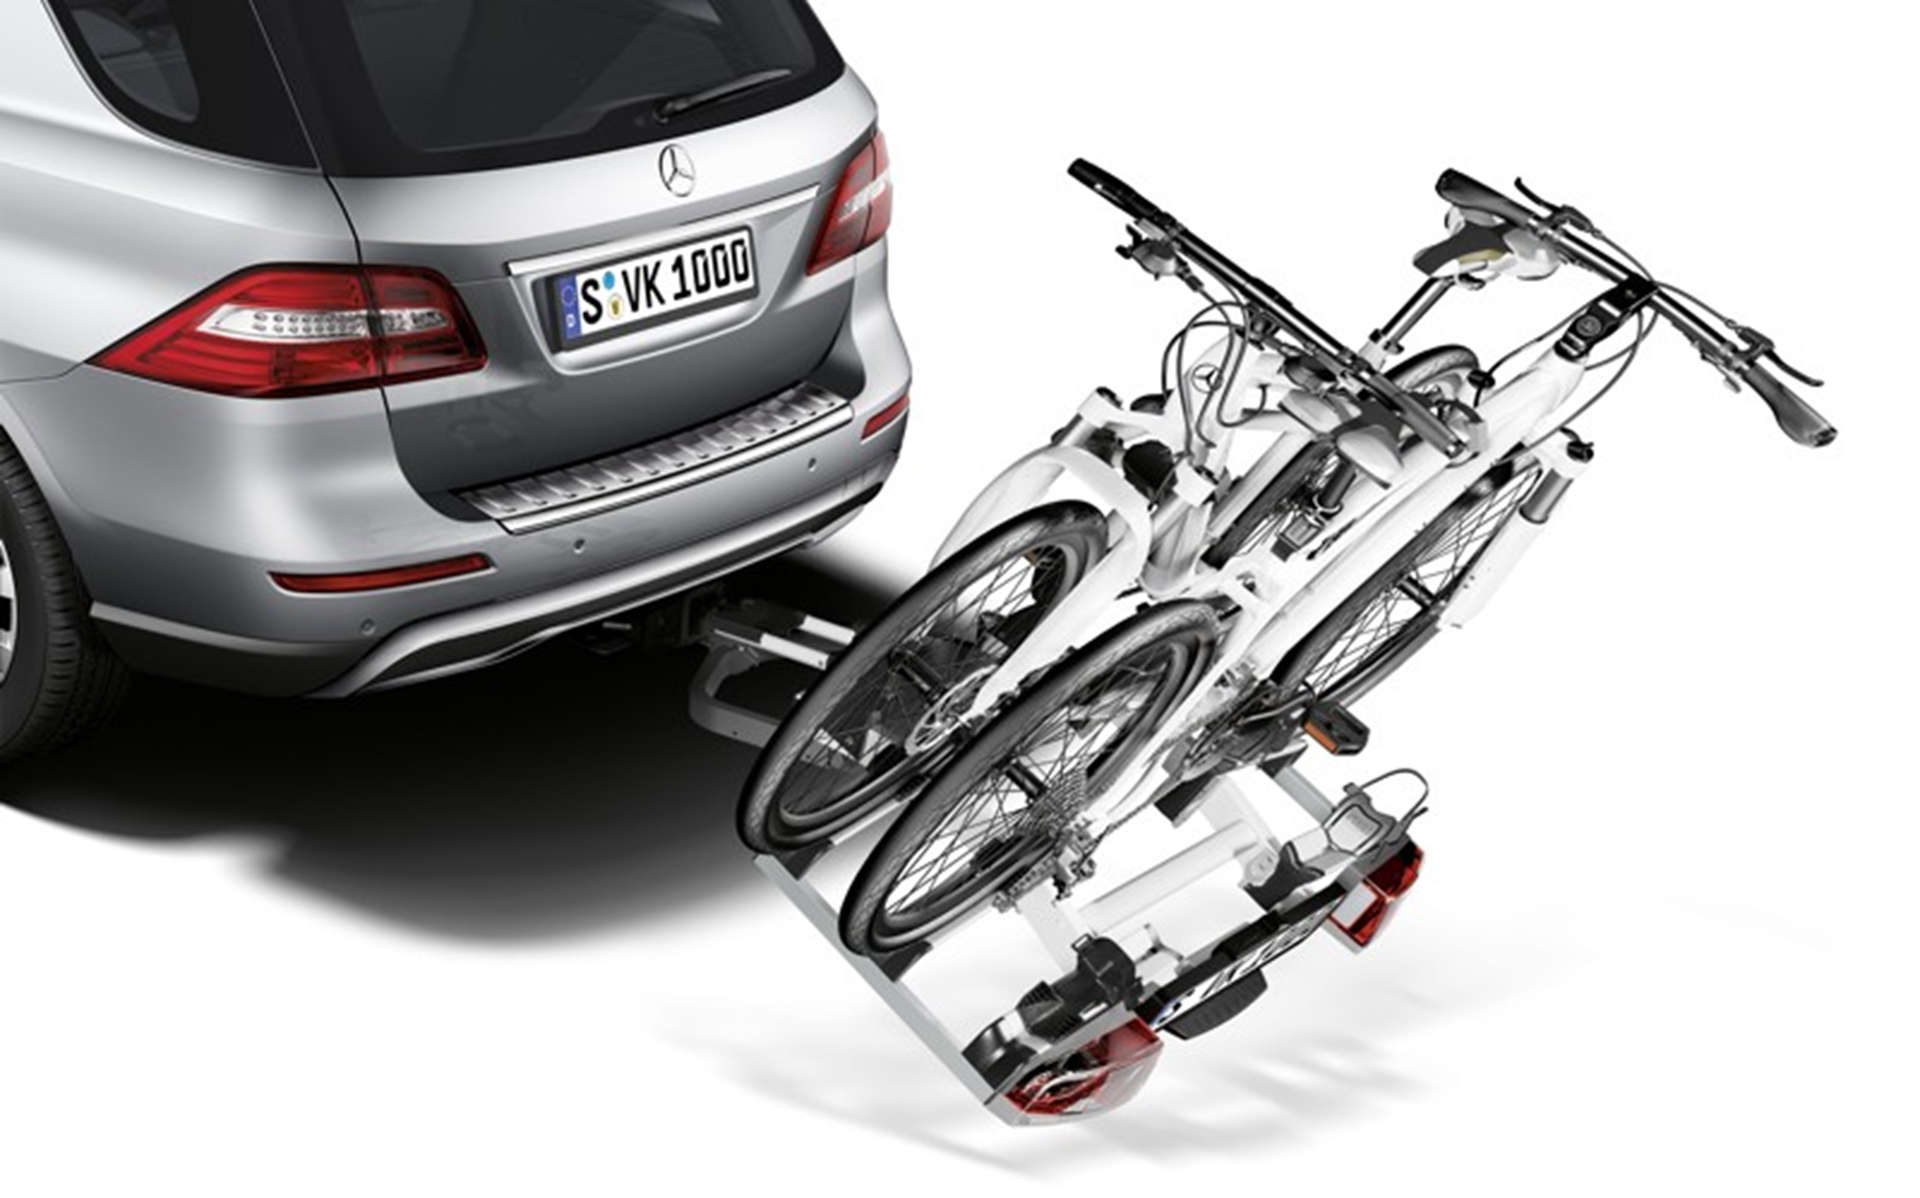 M-Class Rear mounted bicycle rack